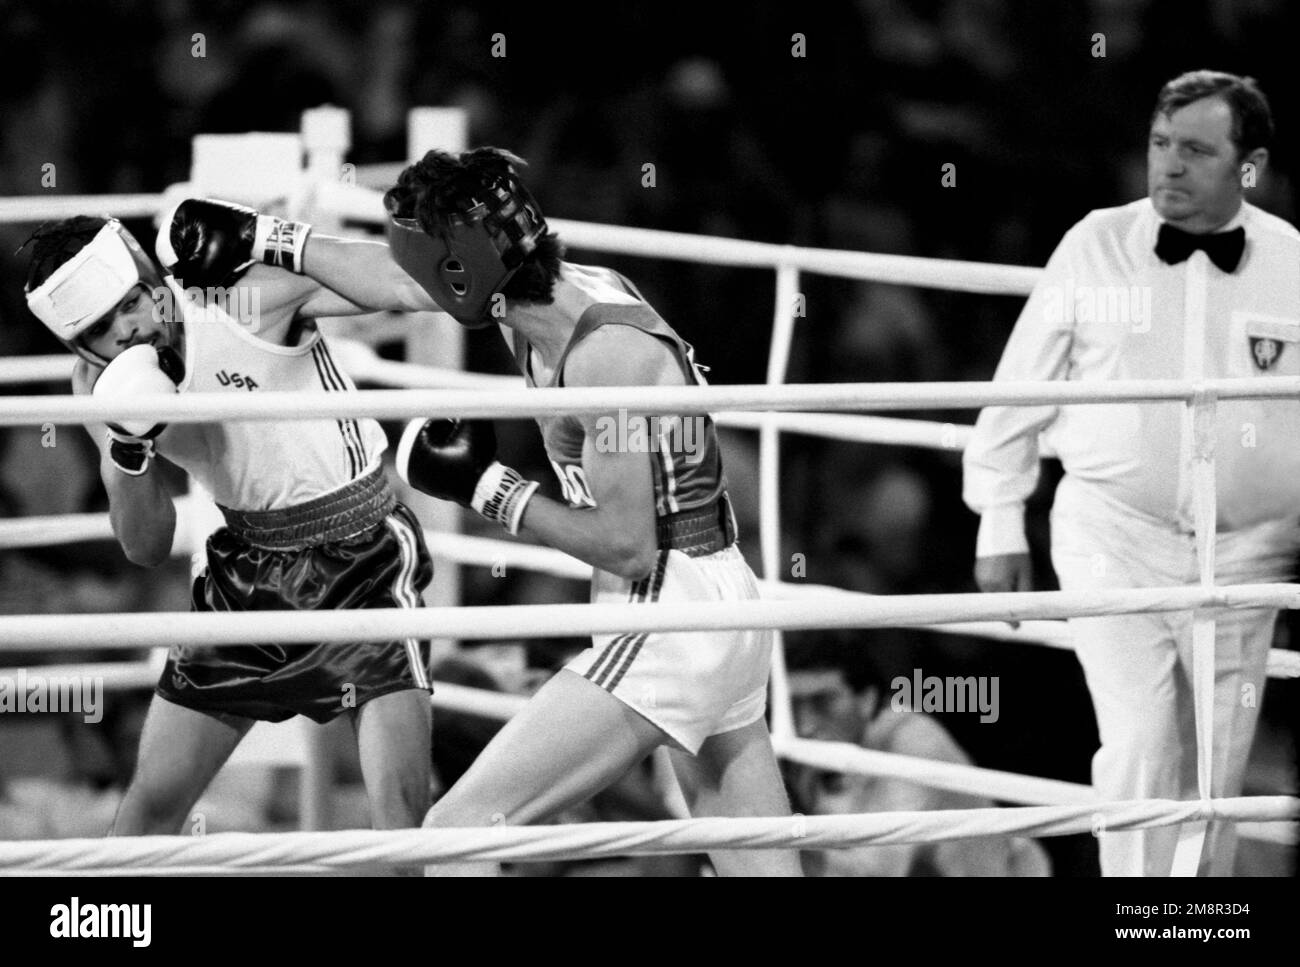 OLYMPISCHE SOMMERSPIELE in LOS ANGELES 1984, BOXEN Jerry Page USA gegen Octavic Robles Mexico in 63,5 kg Stockfoto